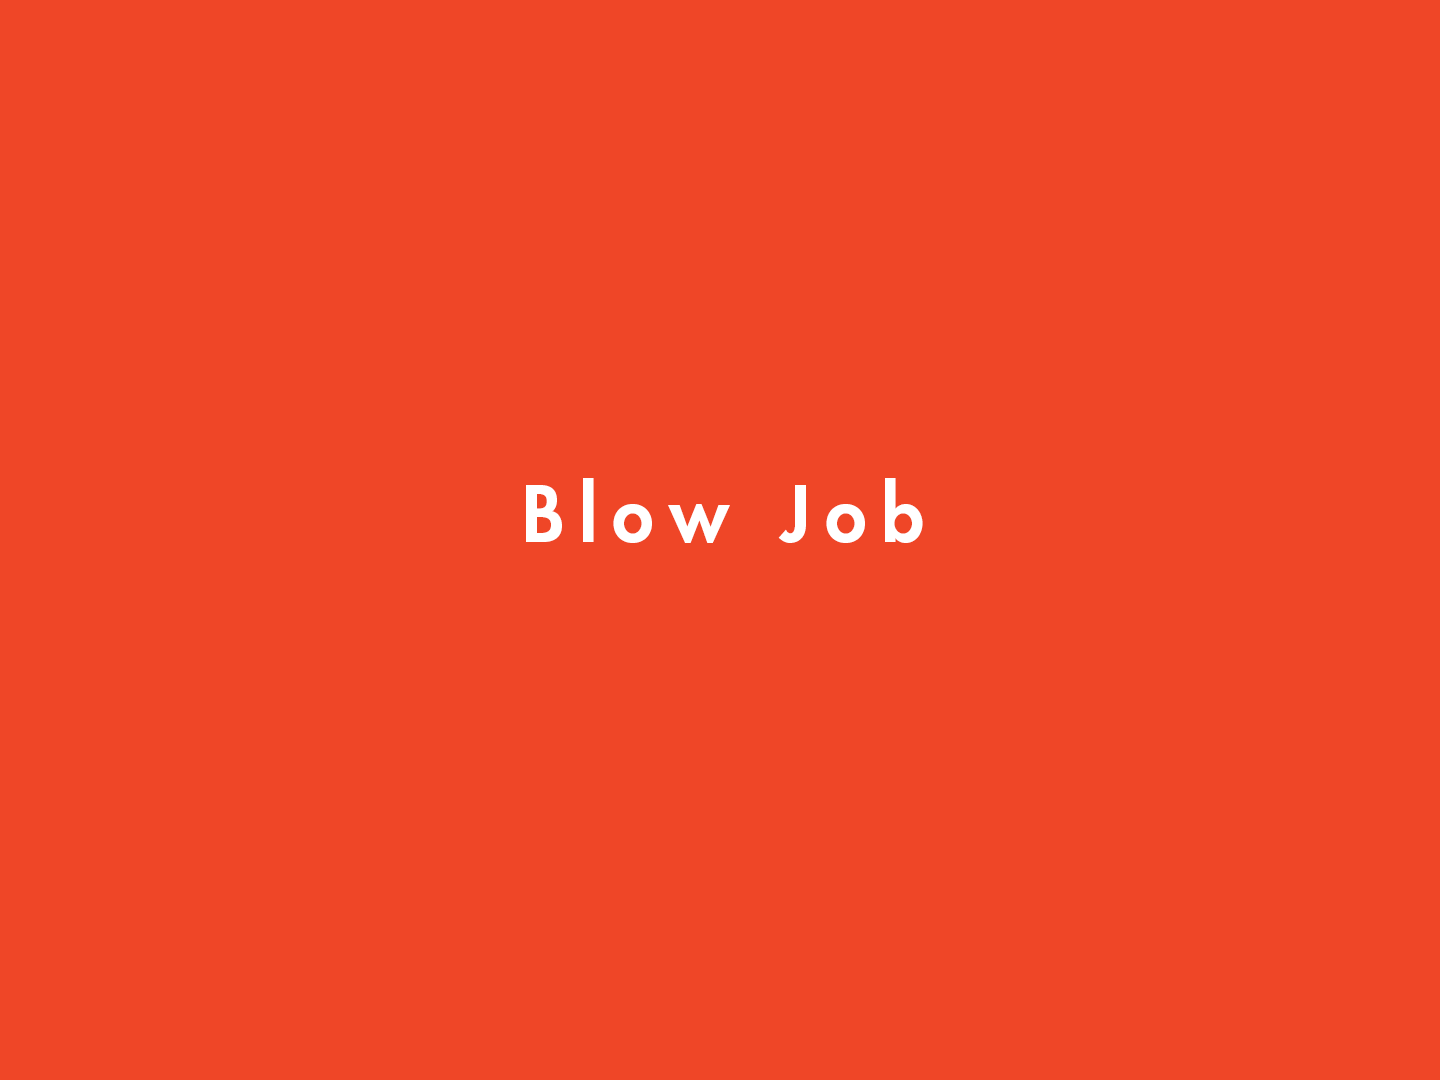 christina bowser recommends where can i get a blowjob pic